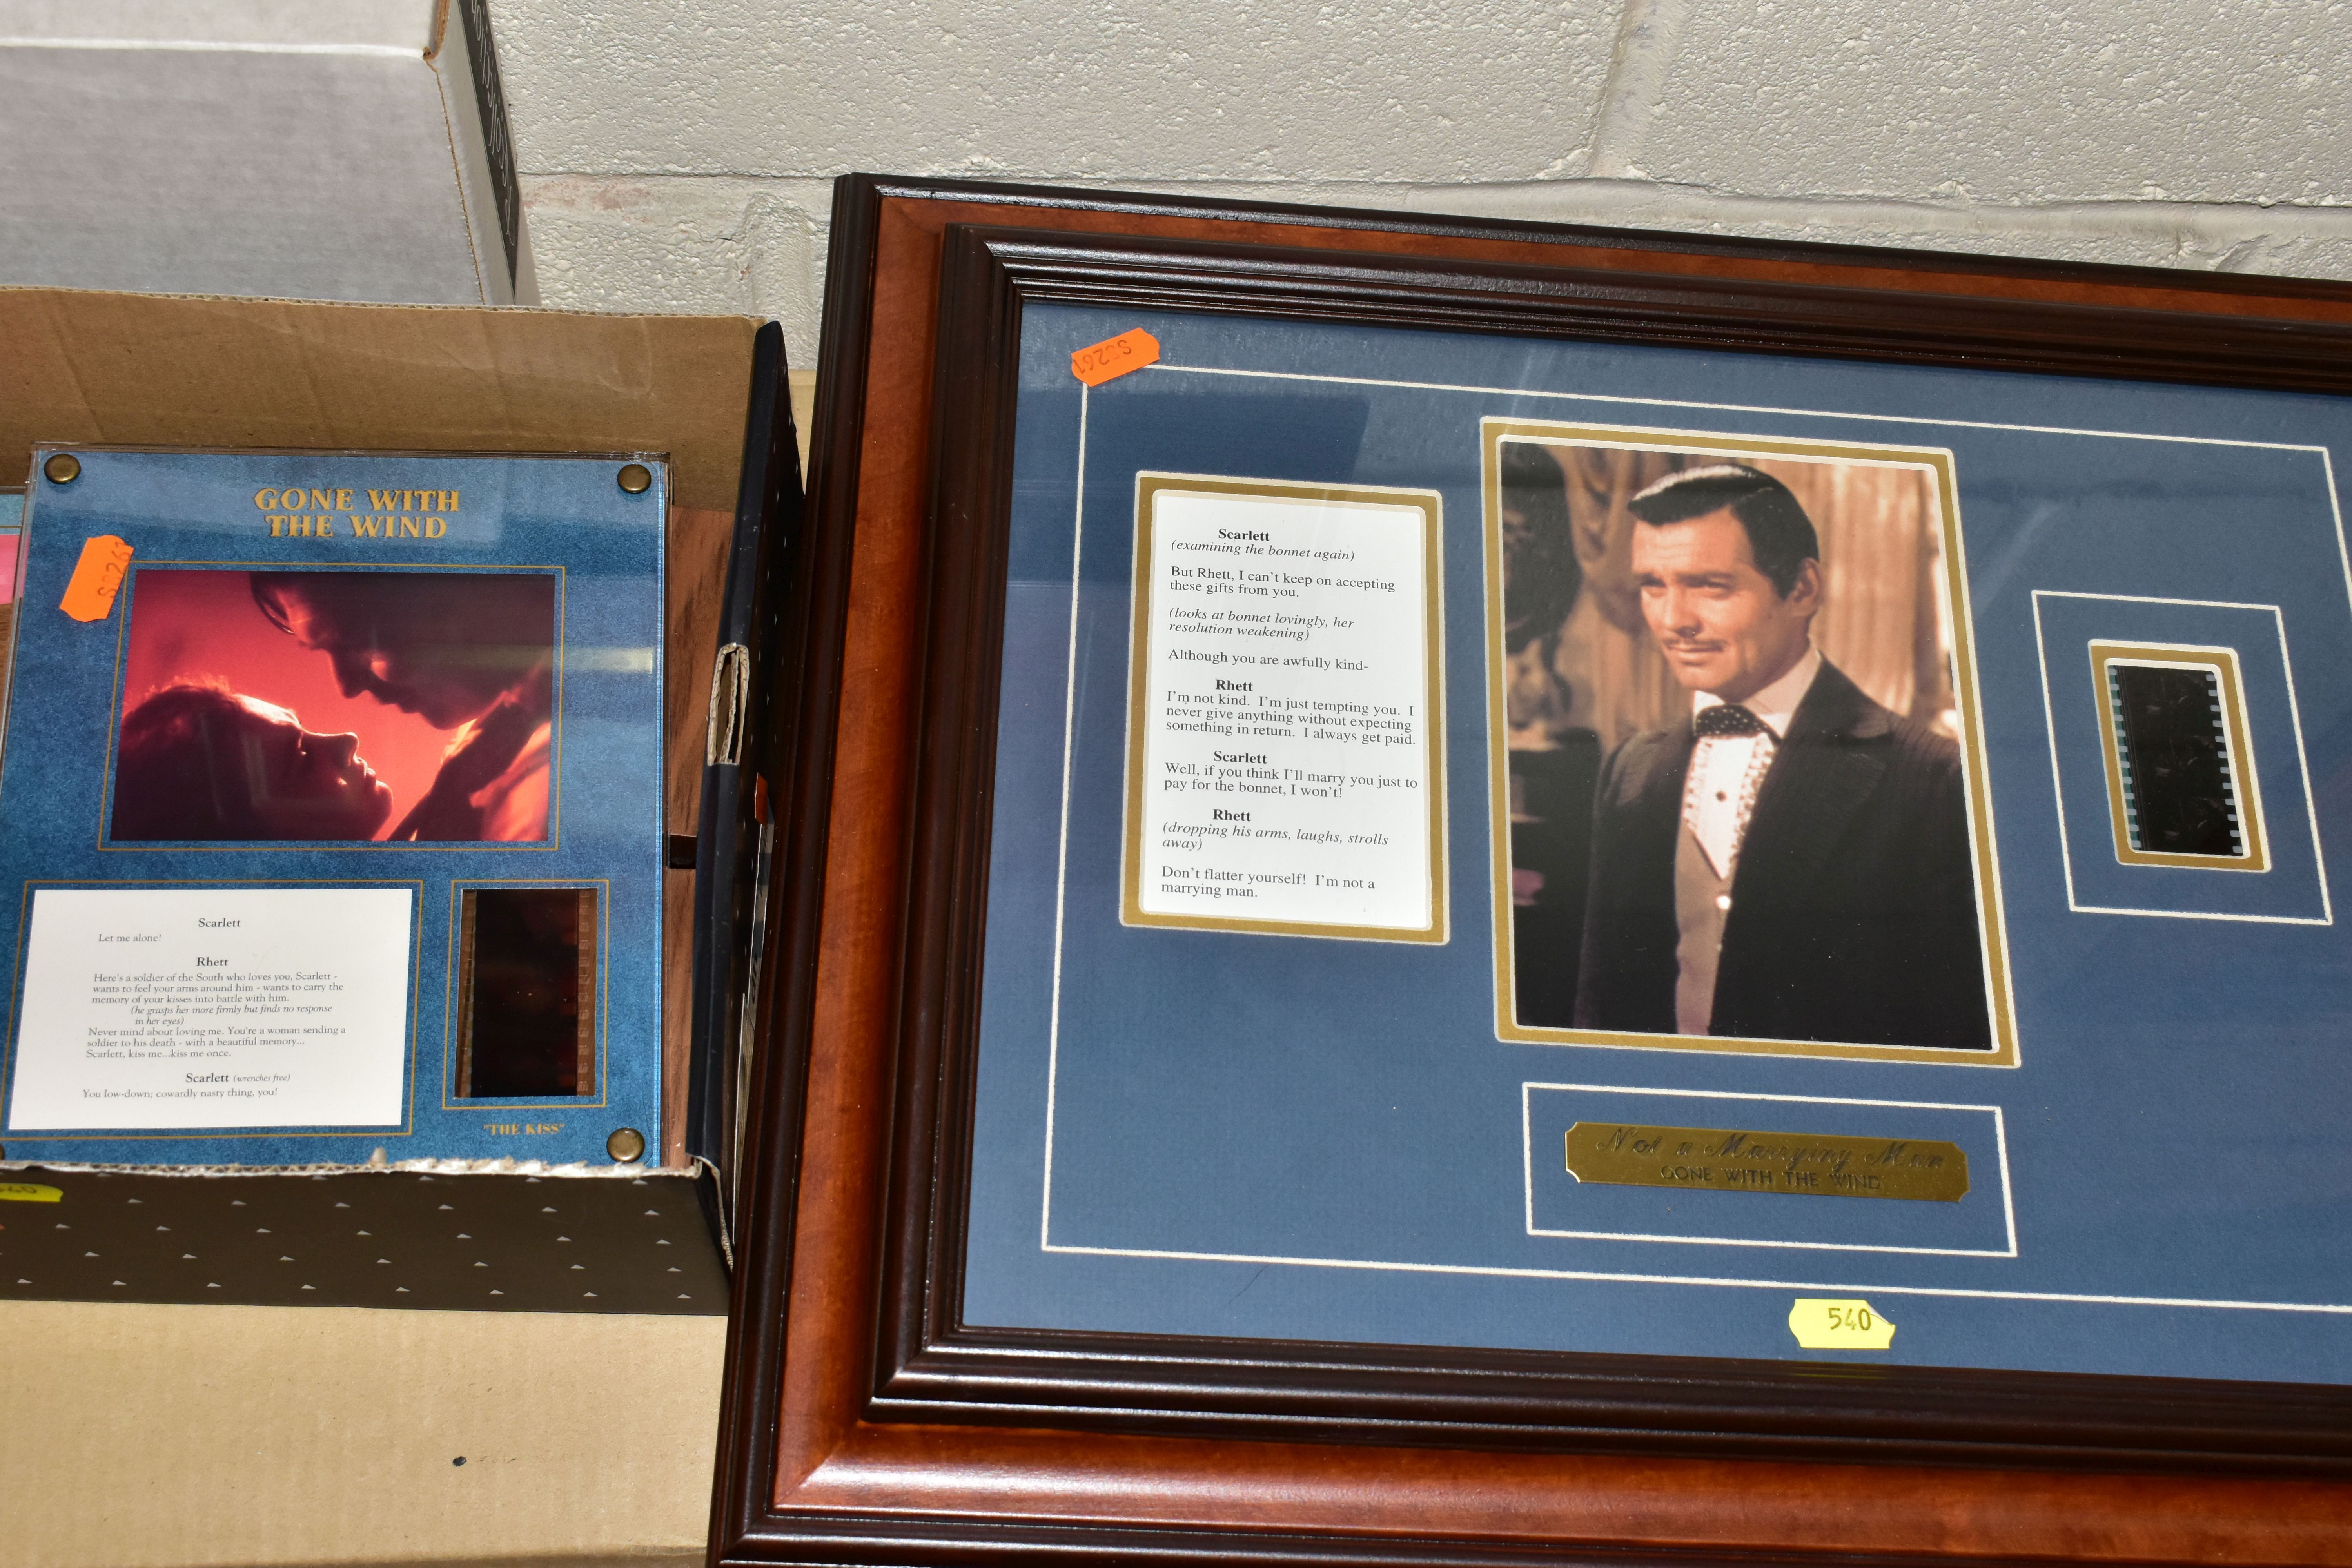 BOXED 'GONE WITH THE WIND' MEMORABILLIA, comprising four limited edition framed montages with - Image 3 of 4